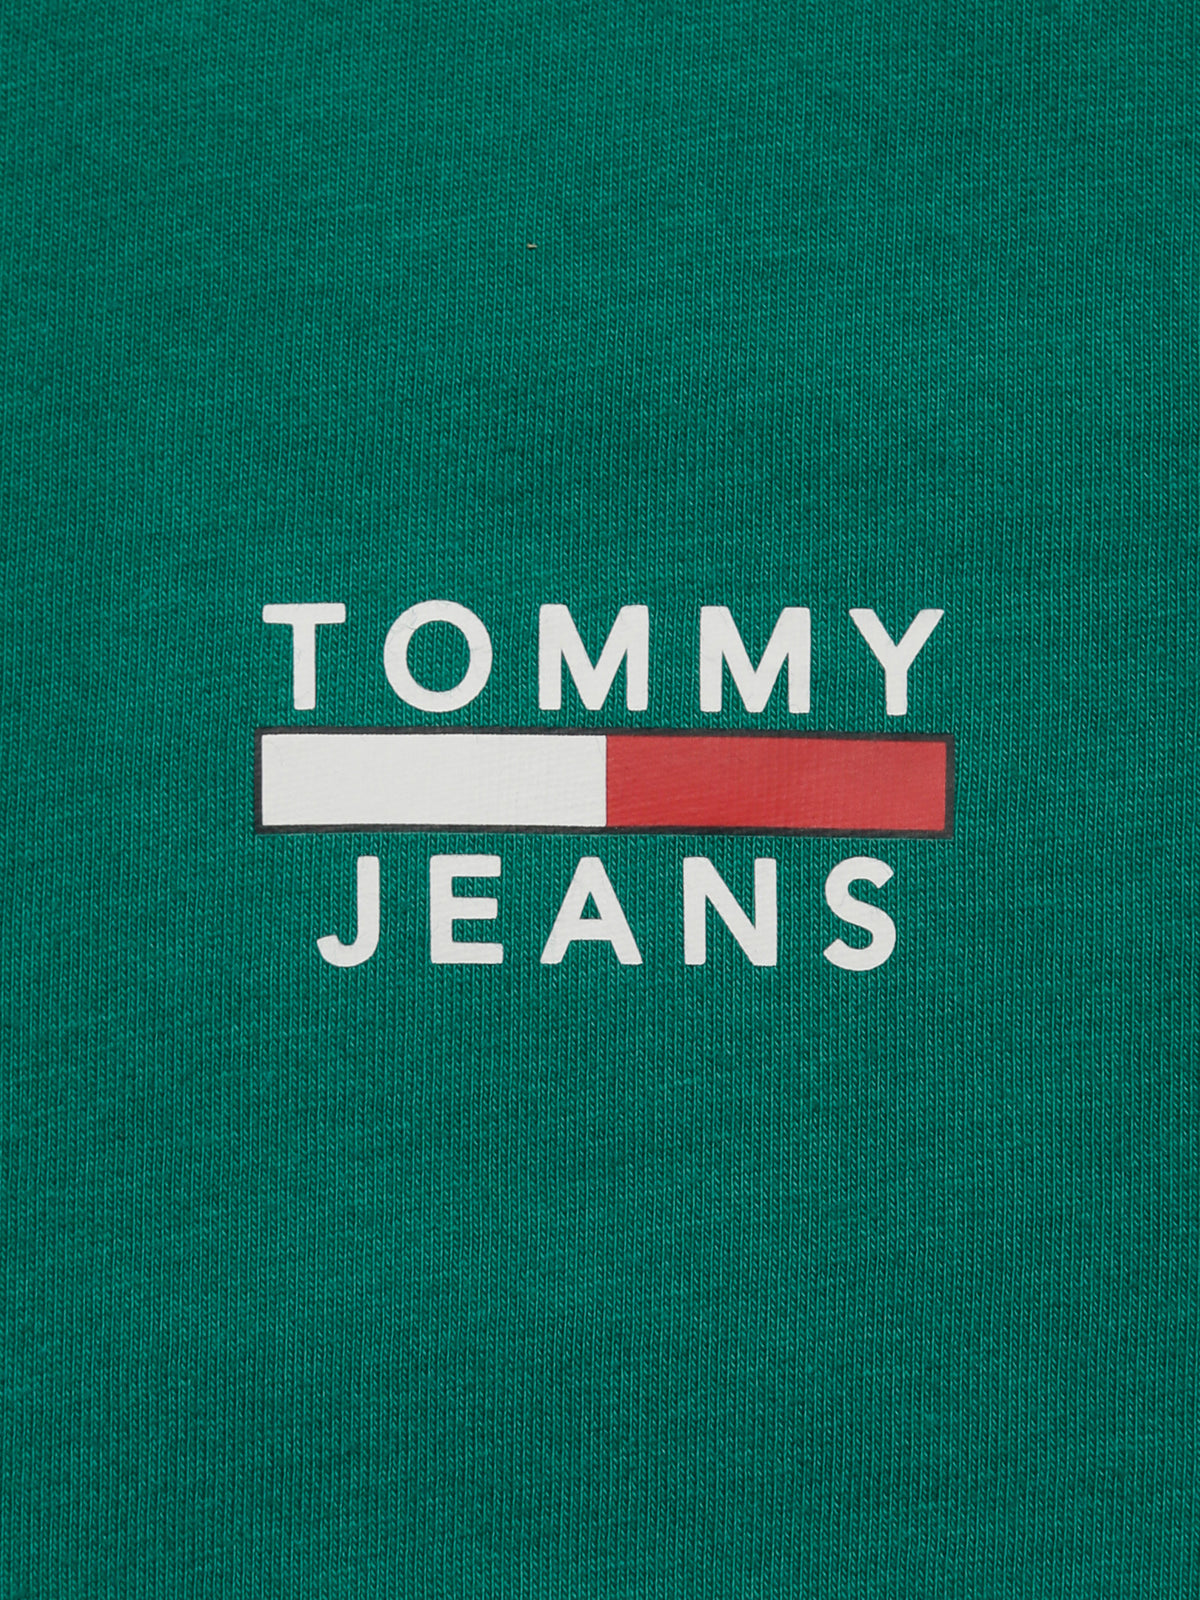 TJM Chest Logo T-Shirt in Midwest Green